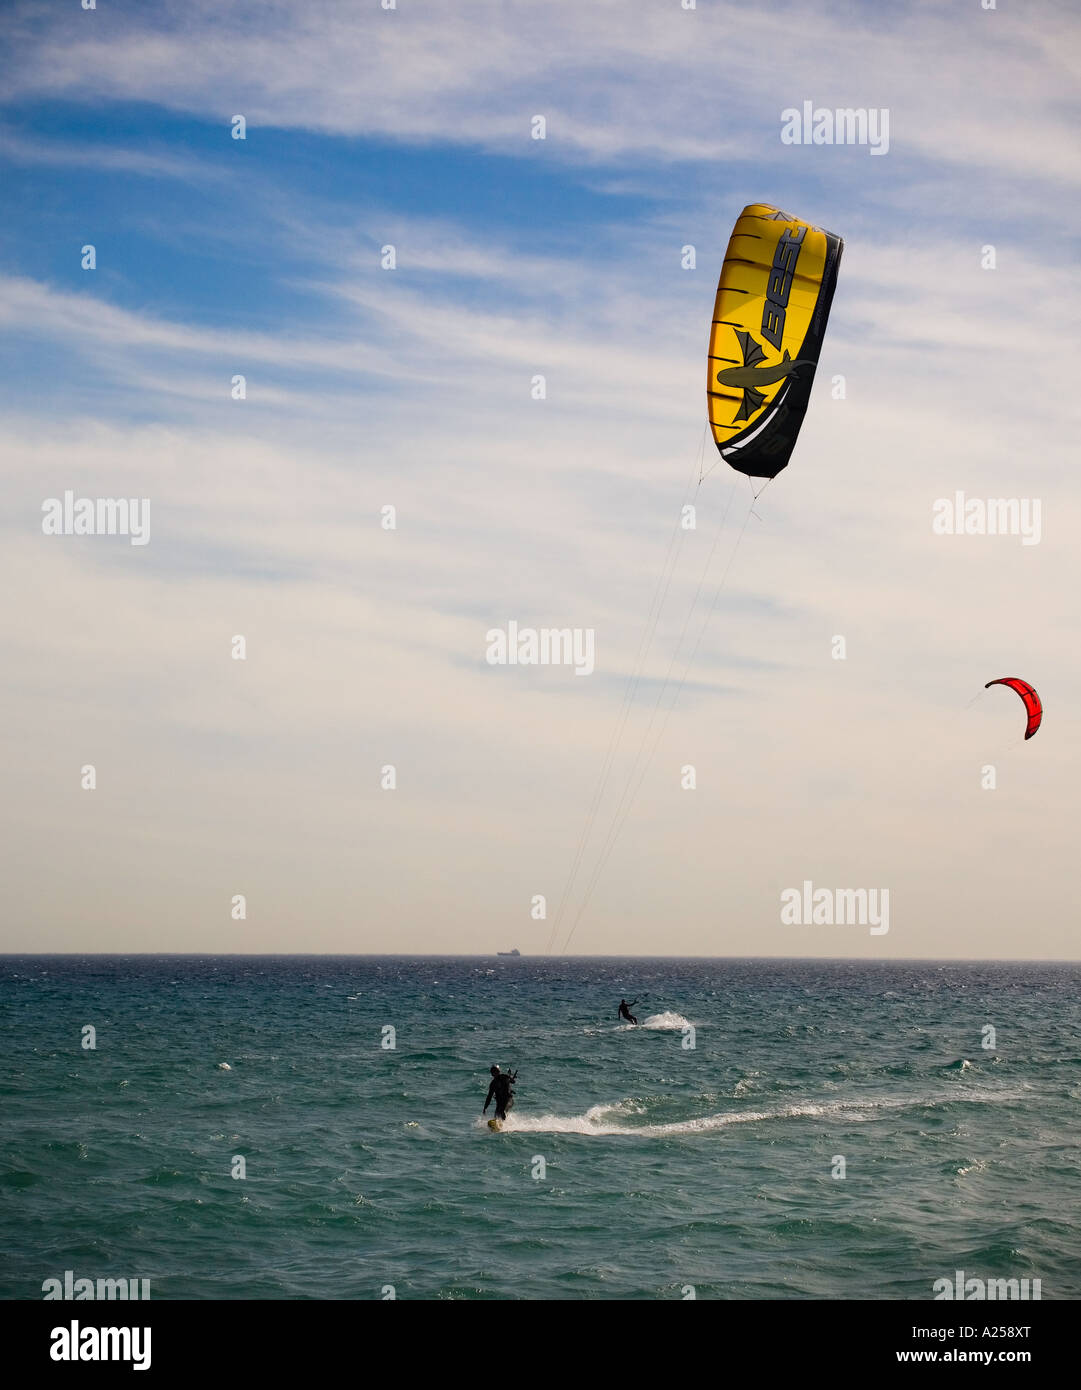 kite surfing at table view Stock Photo - Alamy